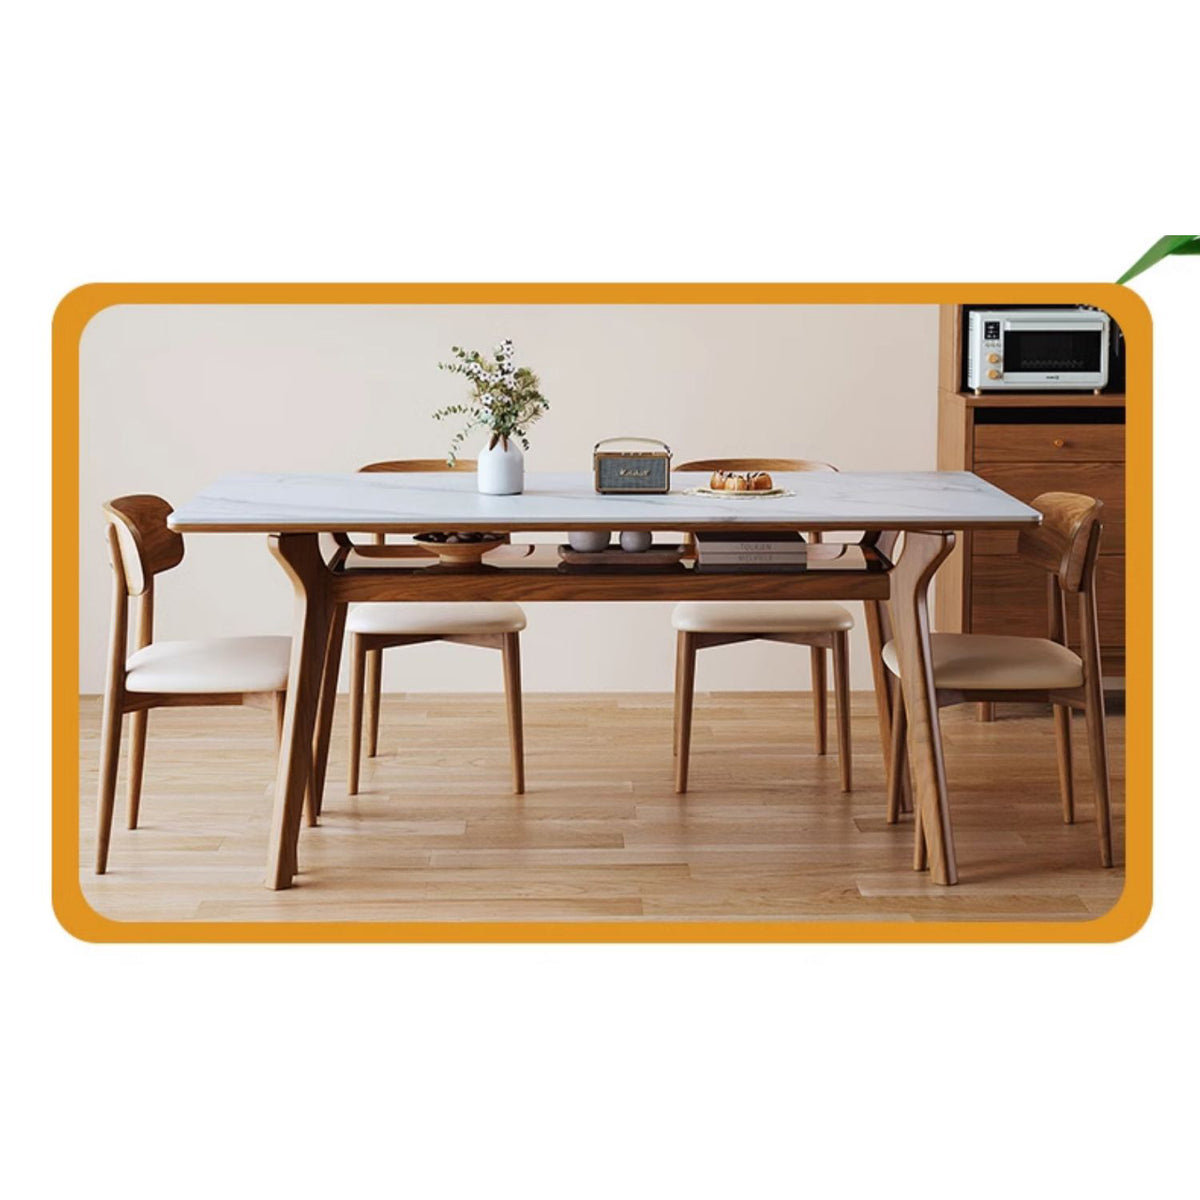 Elegant Brown Frame Table with Natural Sintered Stone and Glass Top, Ash Wood Design fmbs-010